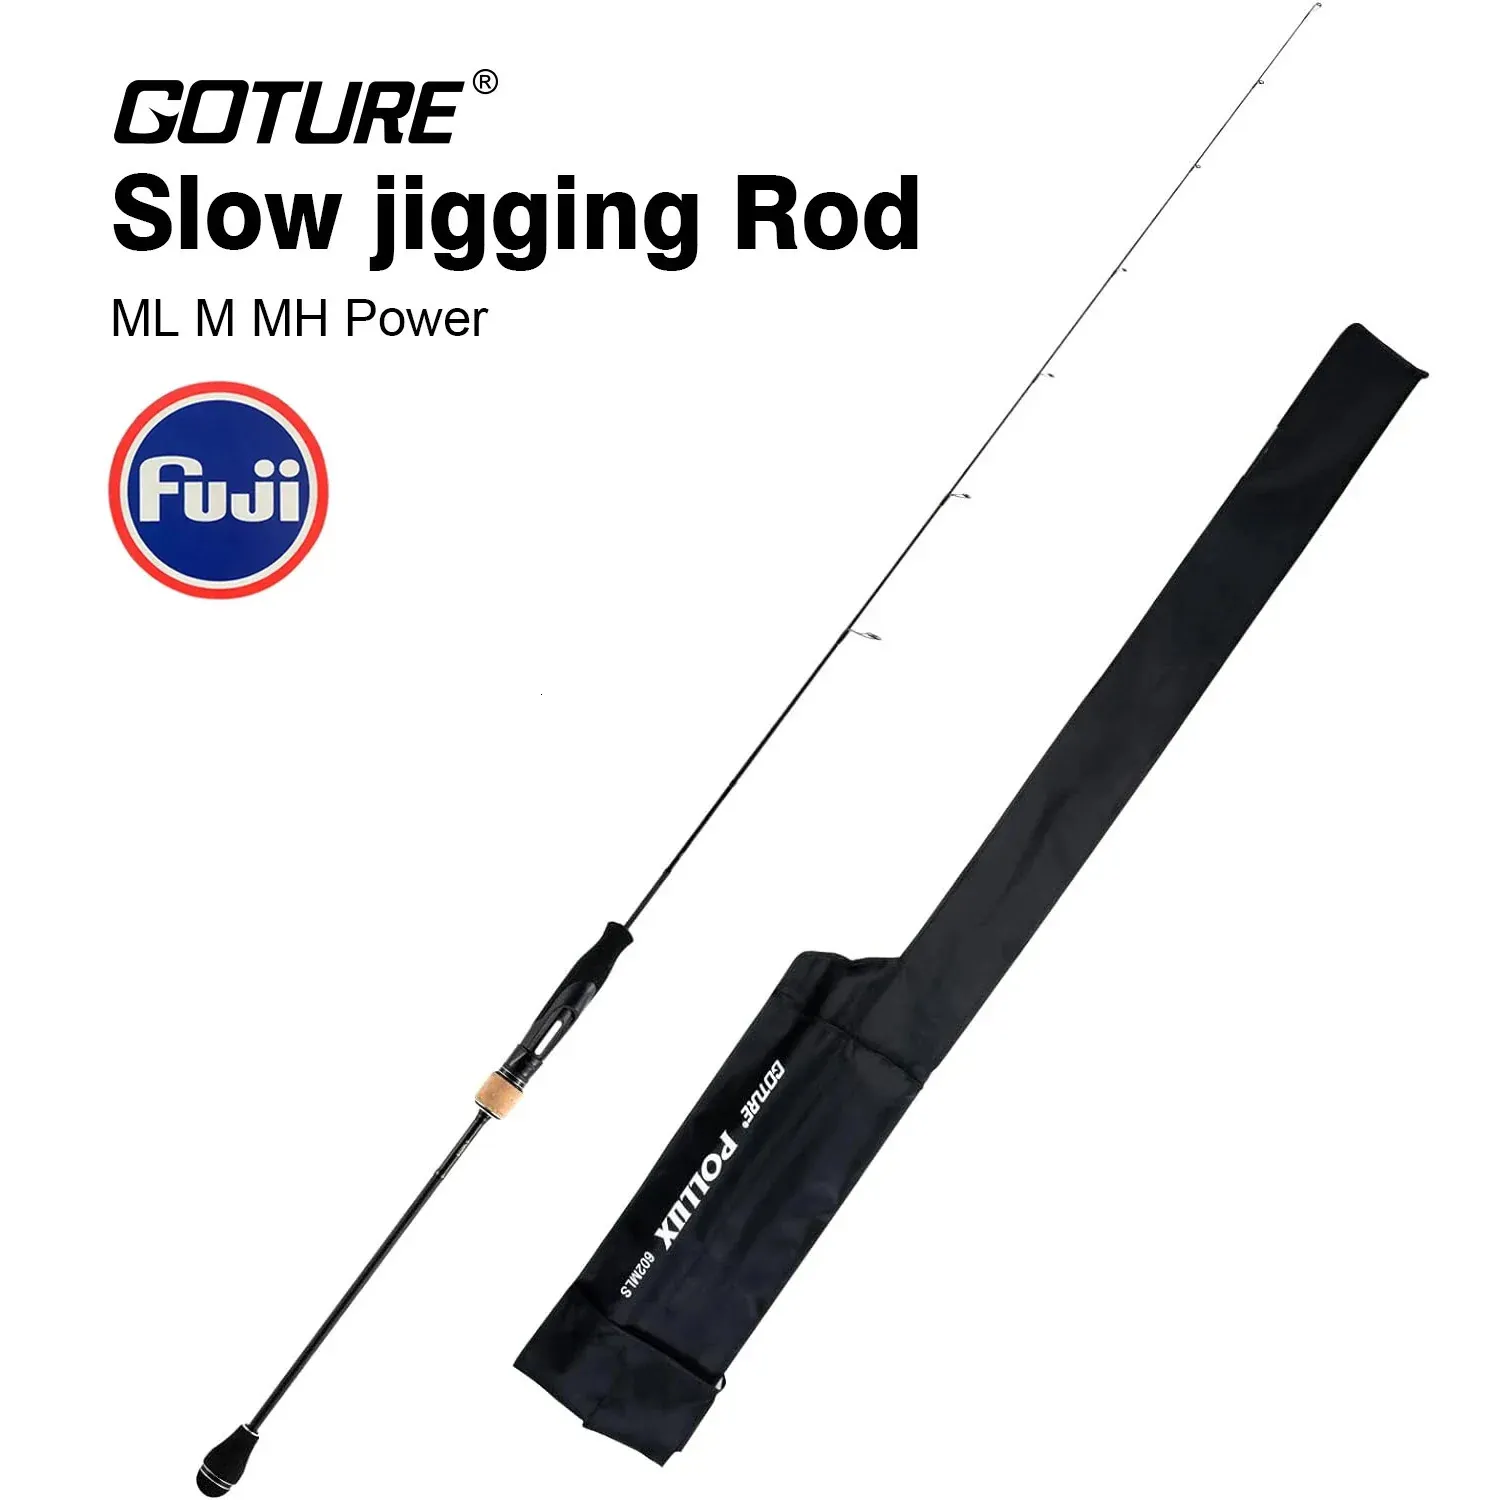 Goture Pollux Japan Quality Fuji Guides Slow Jigging Fishing Rod 1.83m  1.98m Casting Spinning 2 Sections ML M MH Sea Boat Tackle 231228 From  Lian09, $83.93